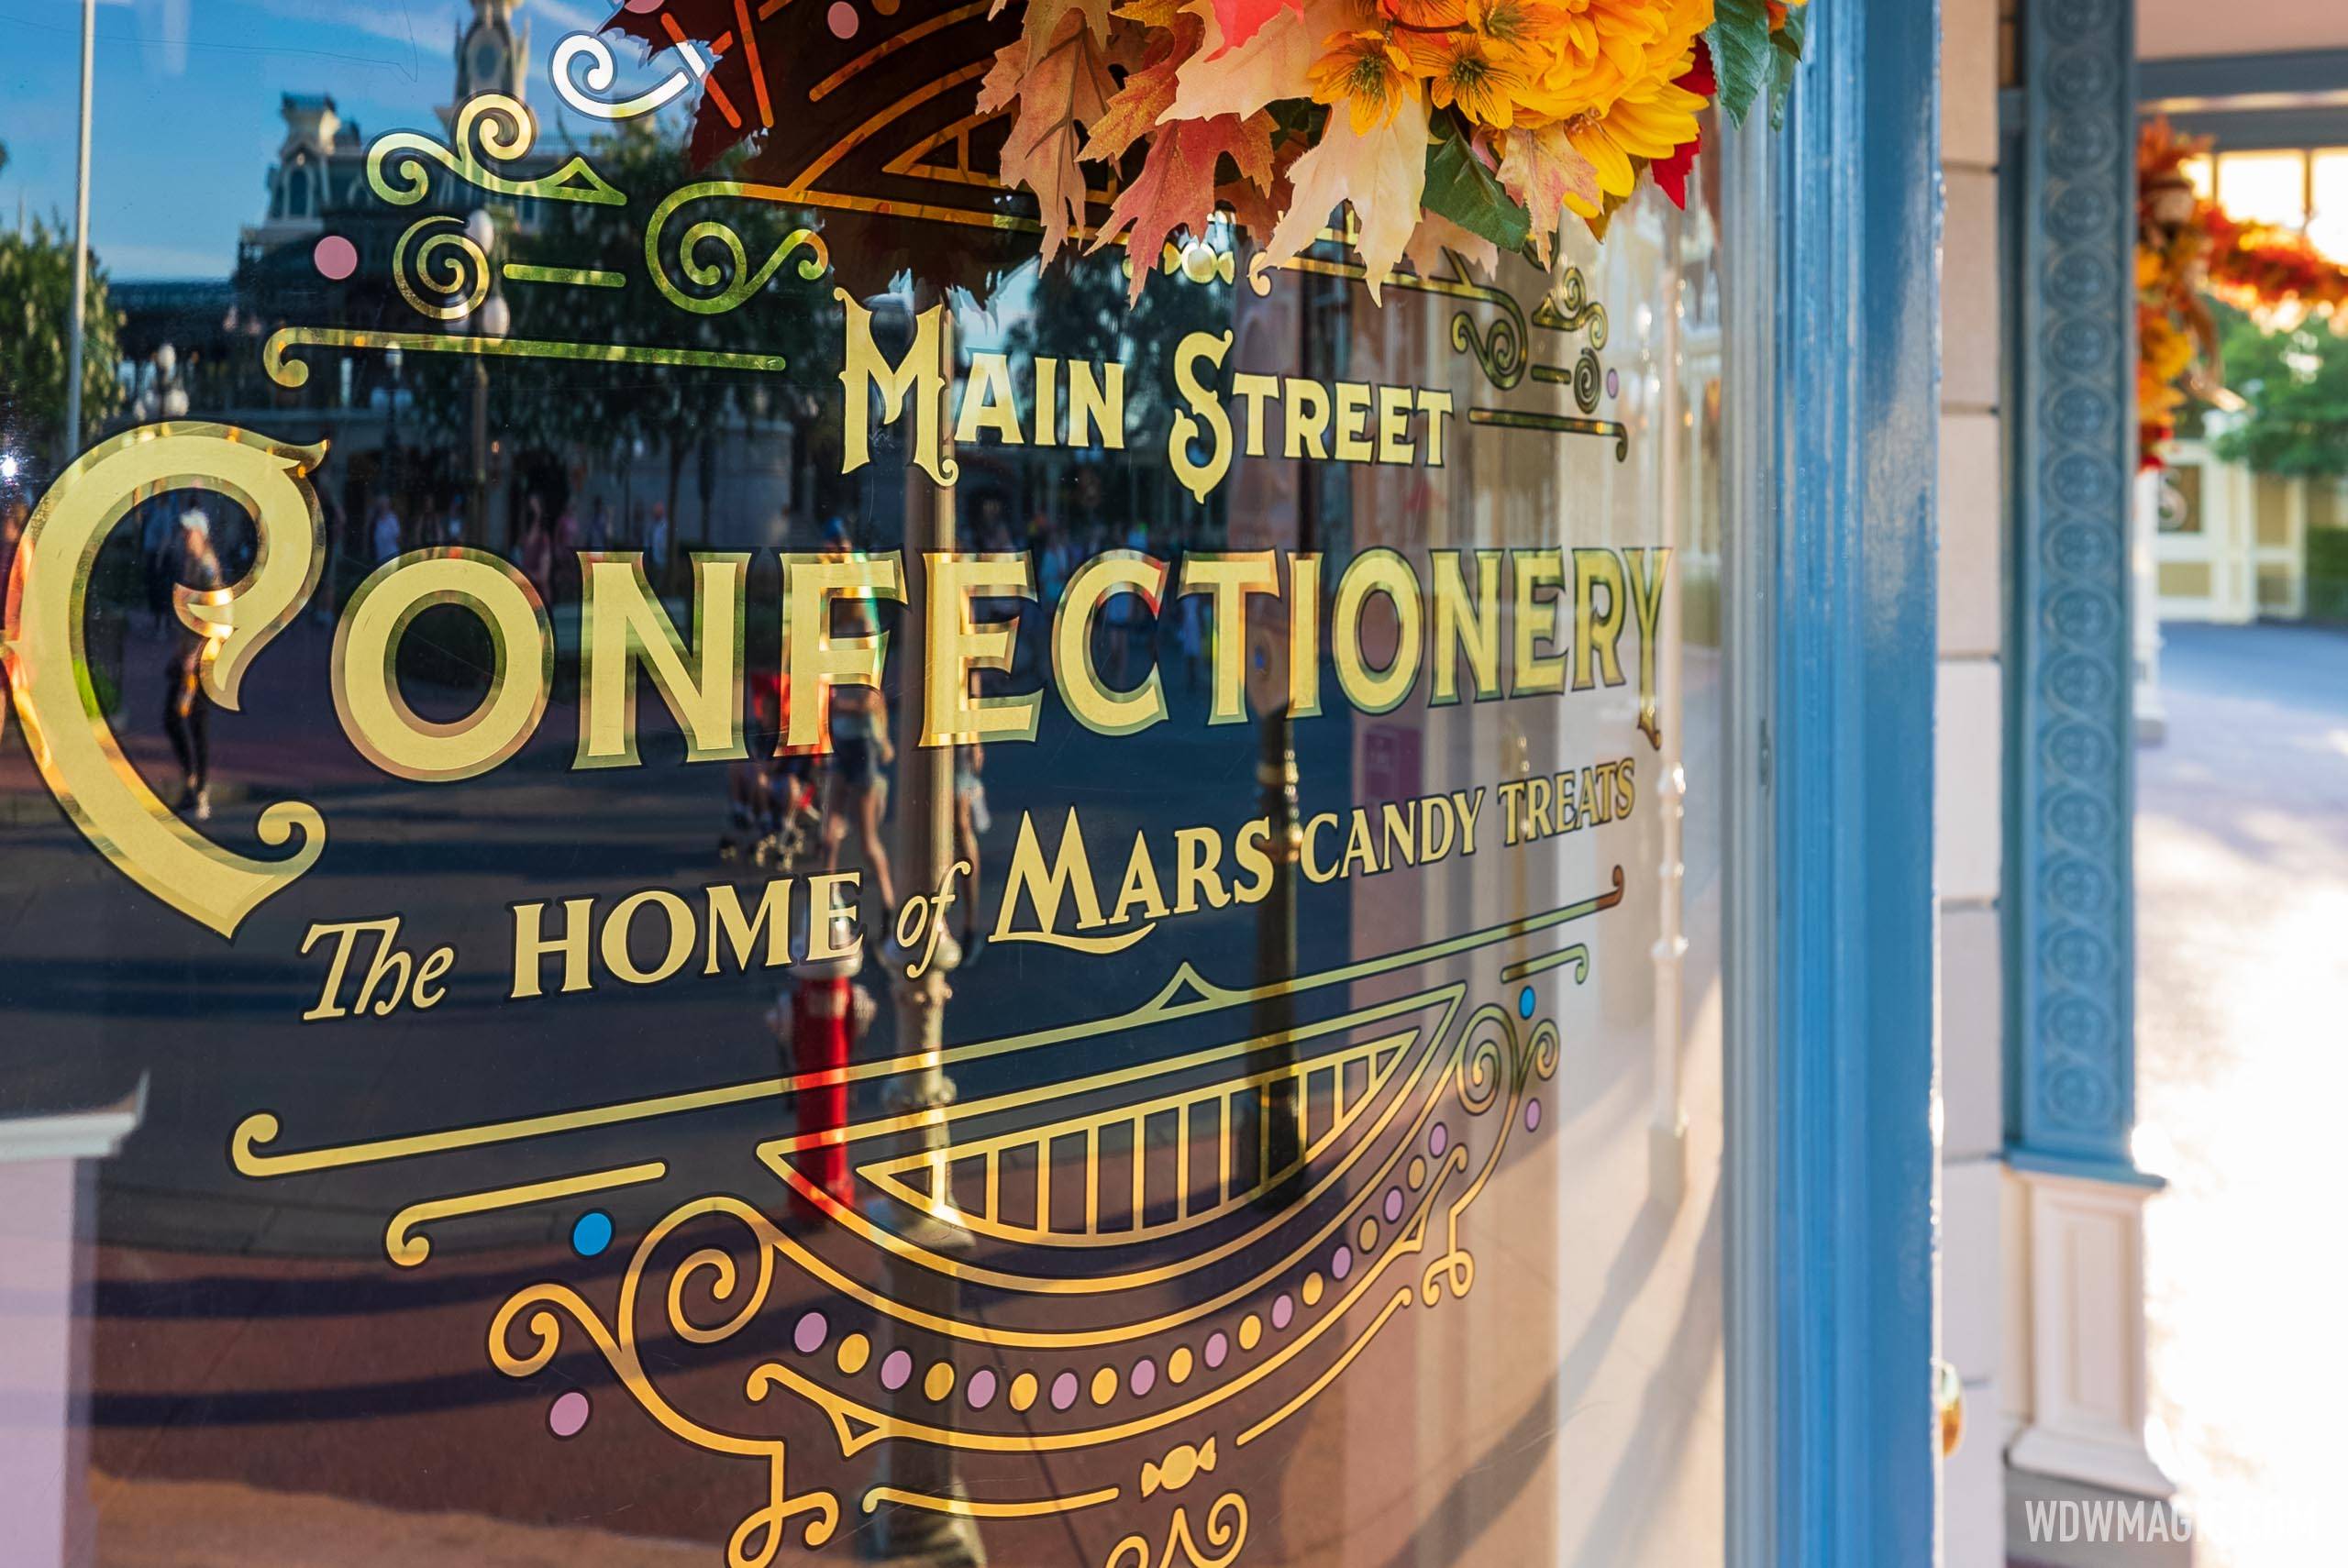 Main Street Confectionery - The Home of Mars Candy Treats